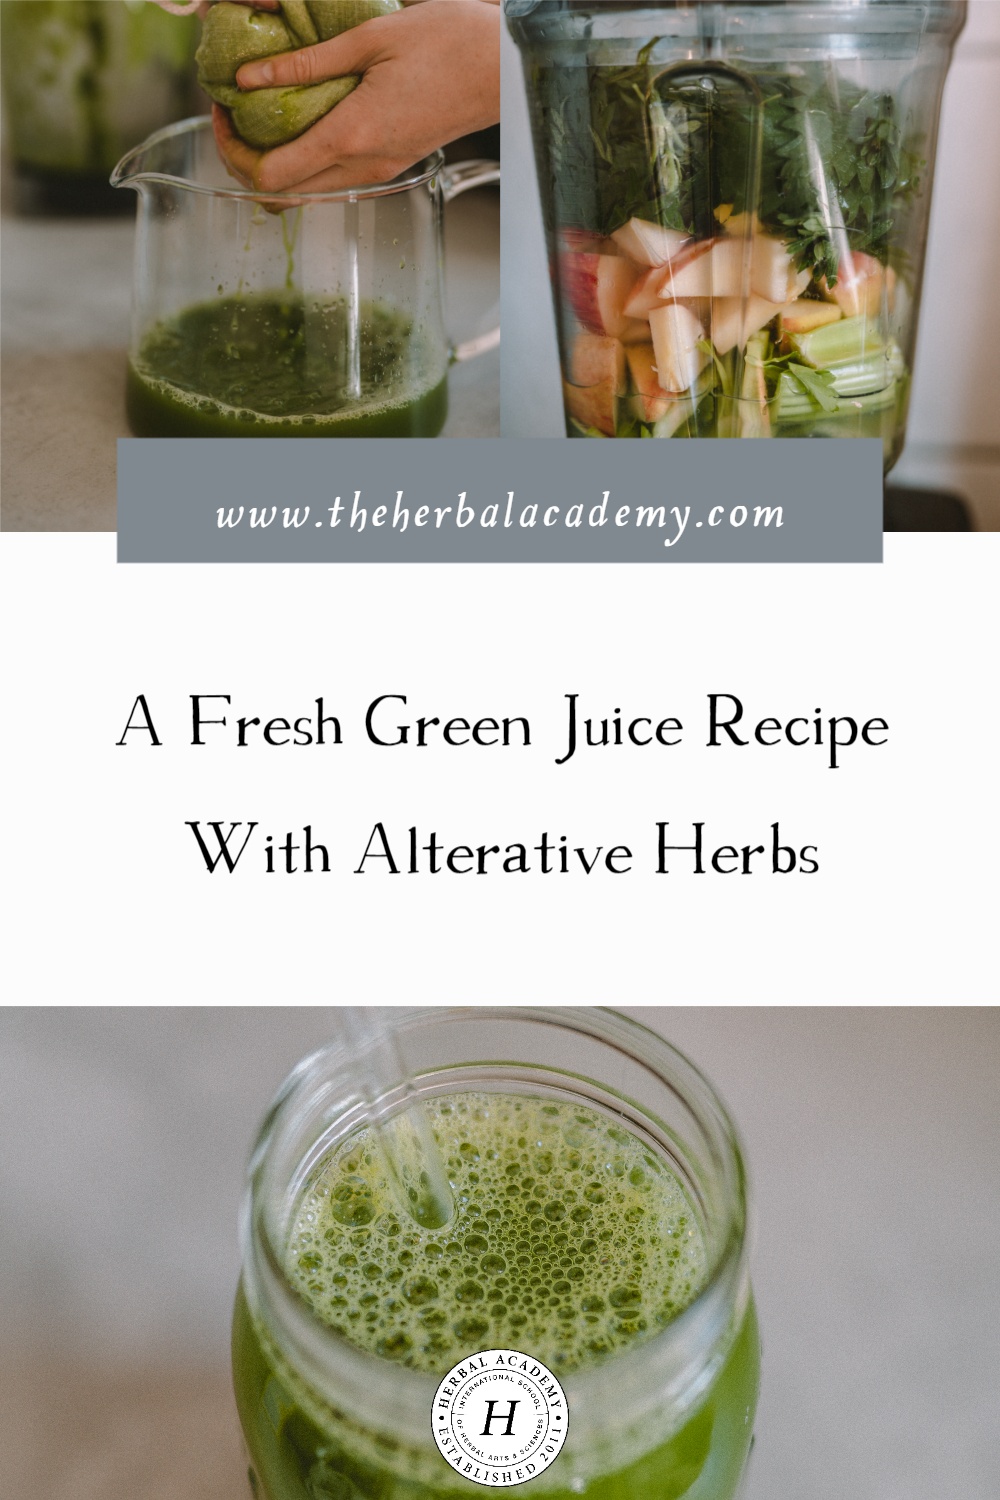 A Fresh Green Juice Recipe With Alterative Herbs | Herbal Academy | In this article, you will learn how alteratives work and find a delicious green juice recipe that is perfect for spring.